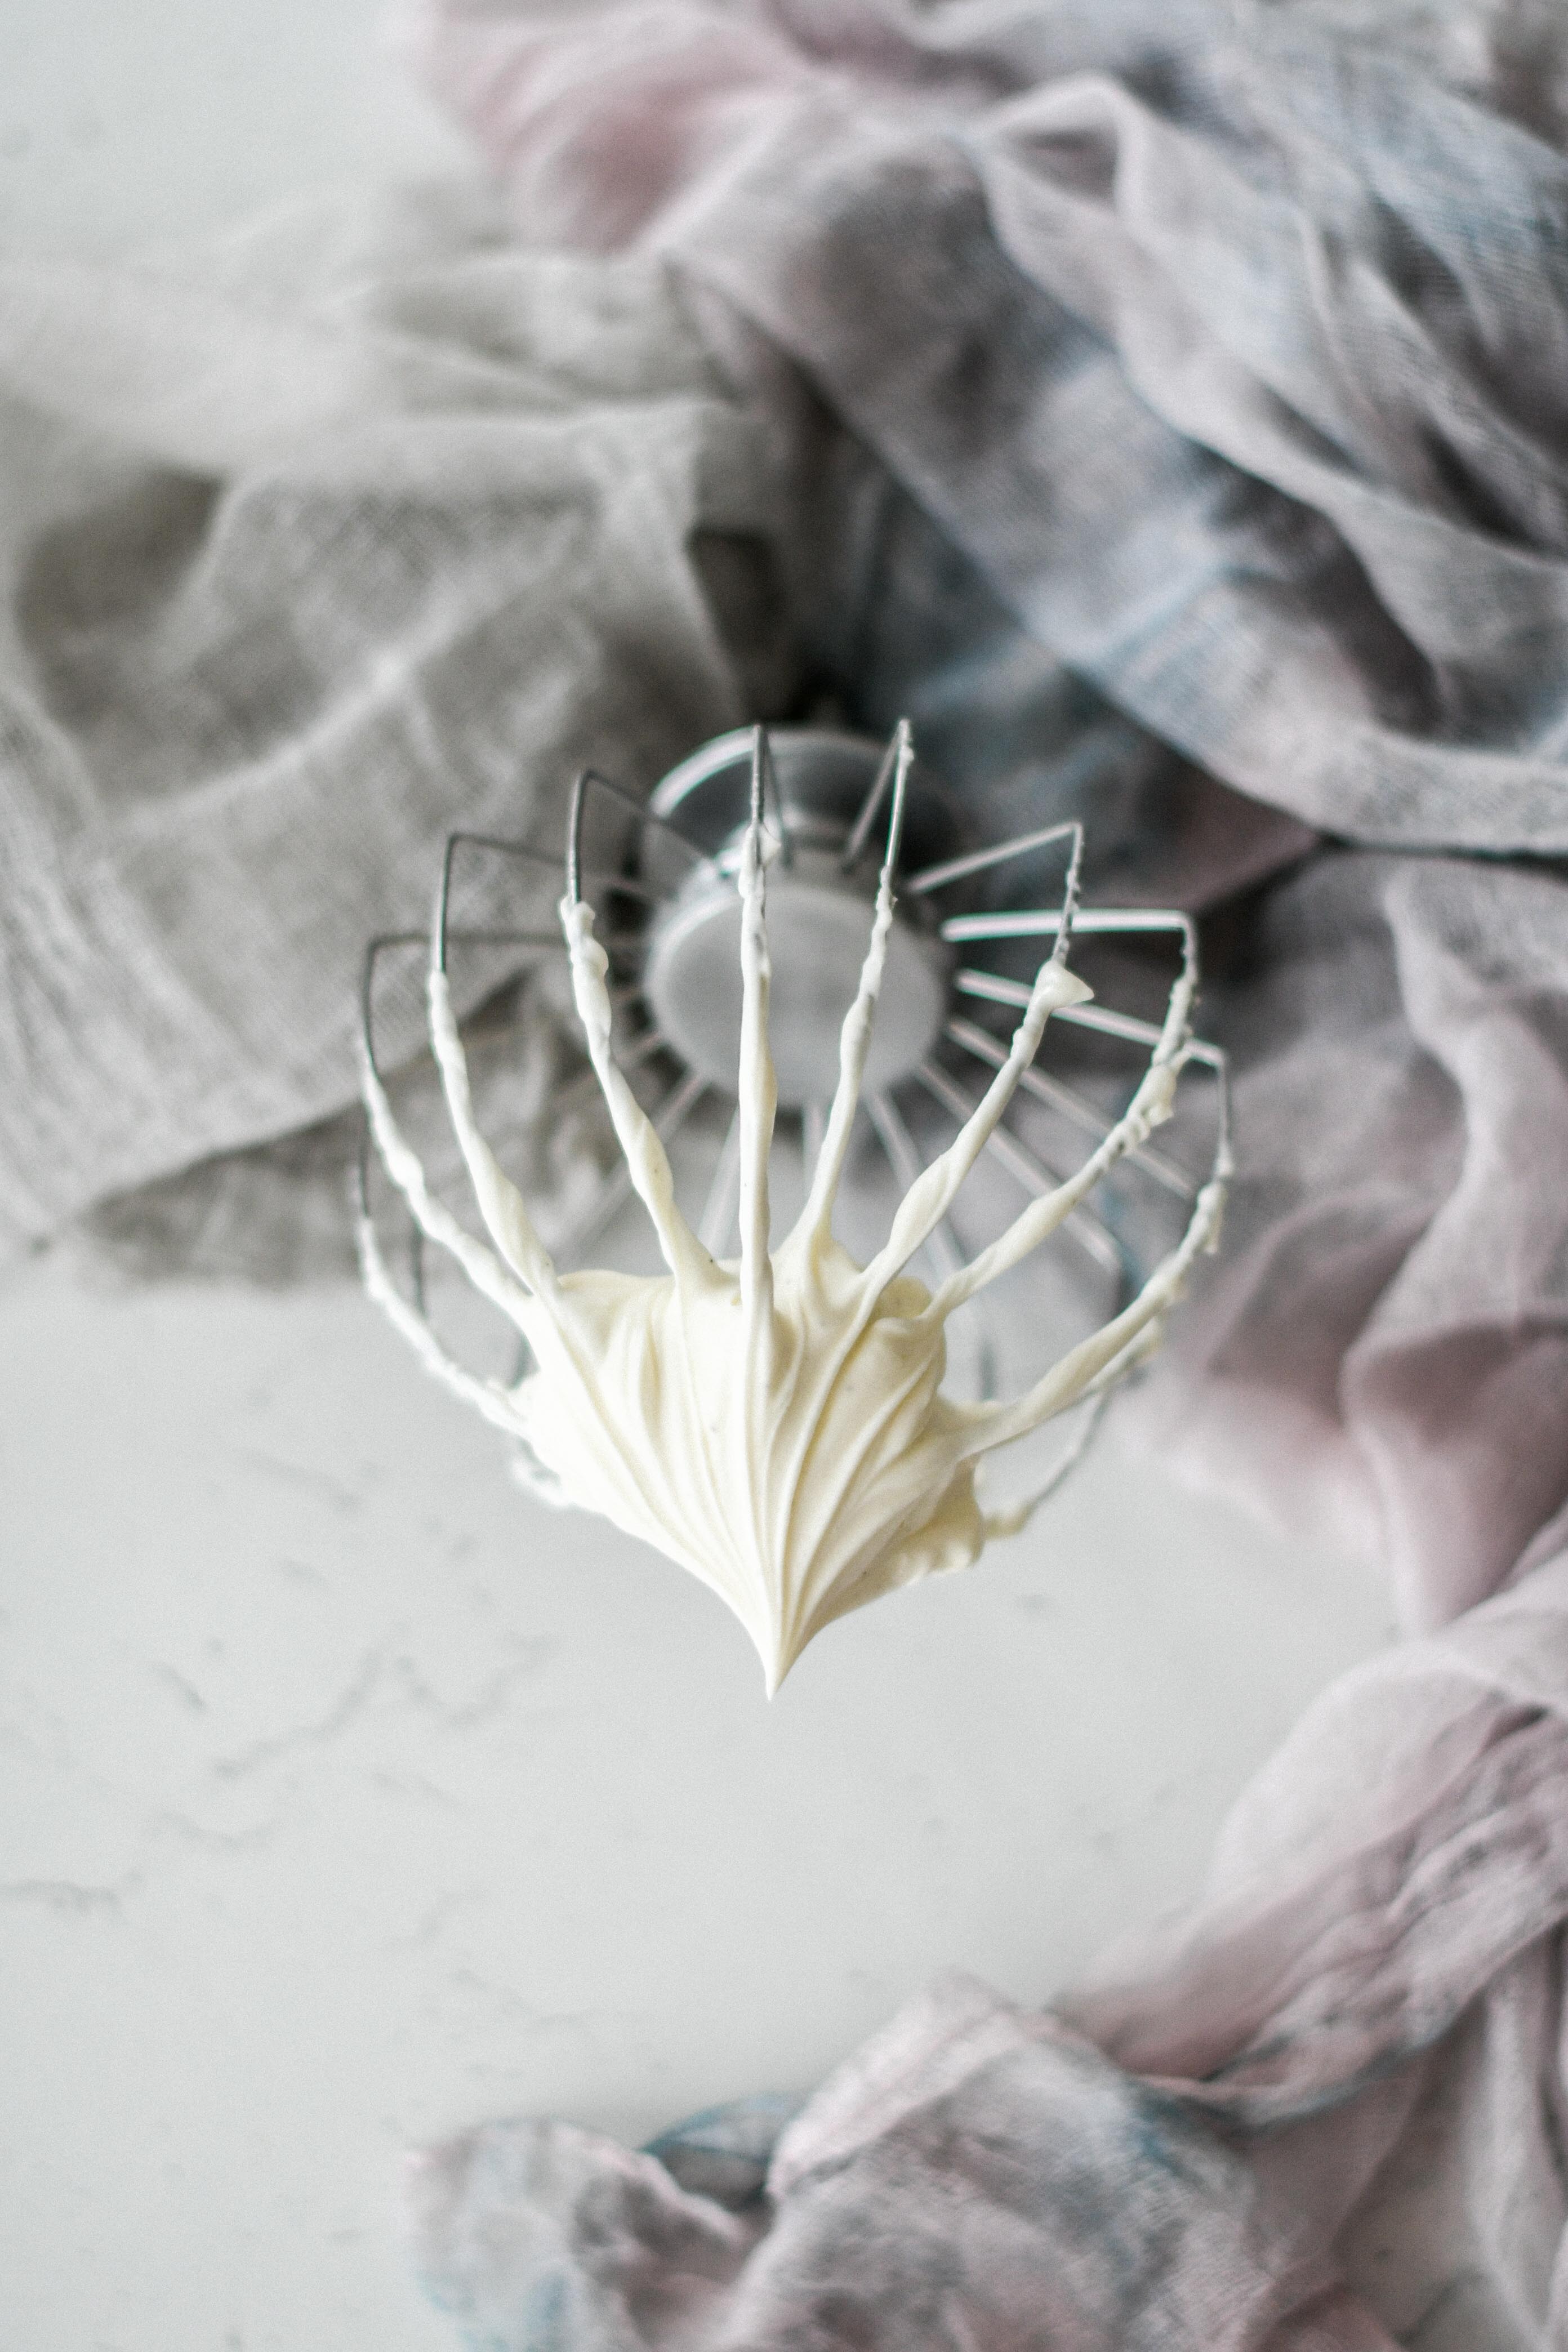 cream cheese frosting photography